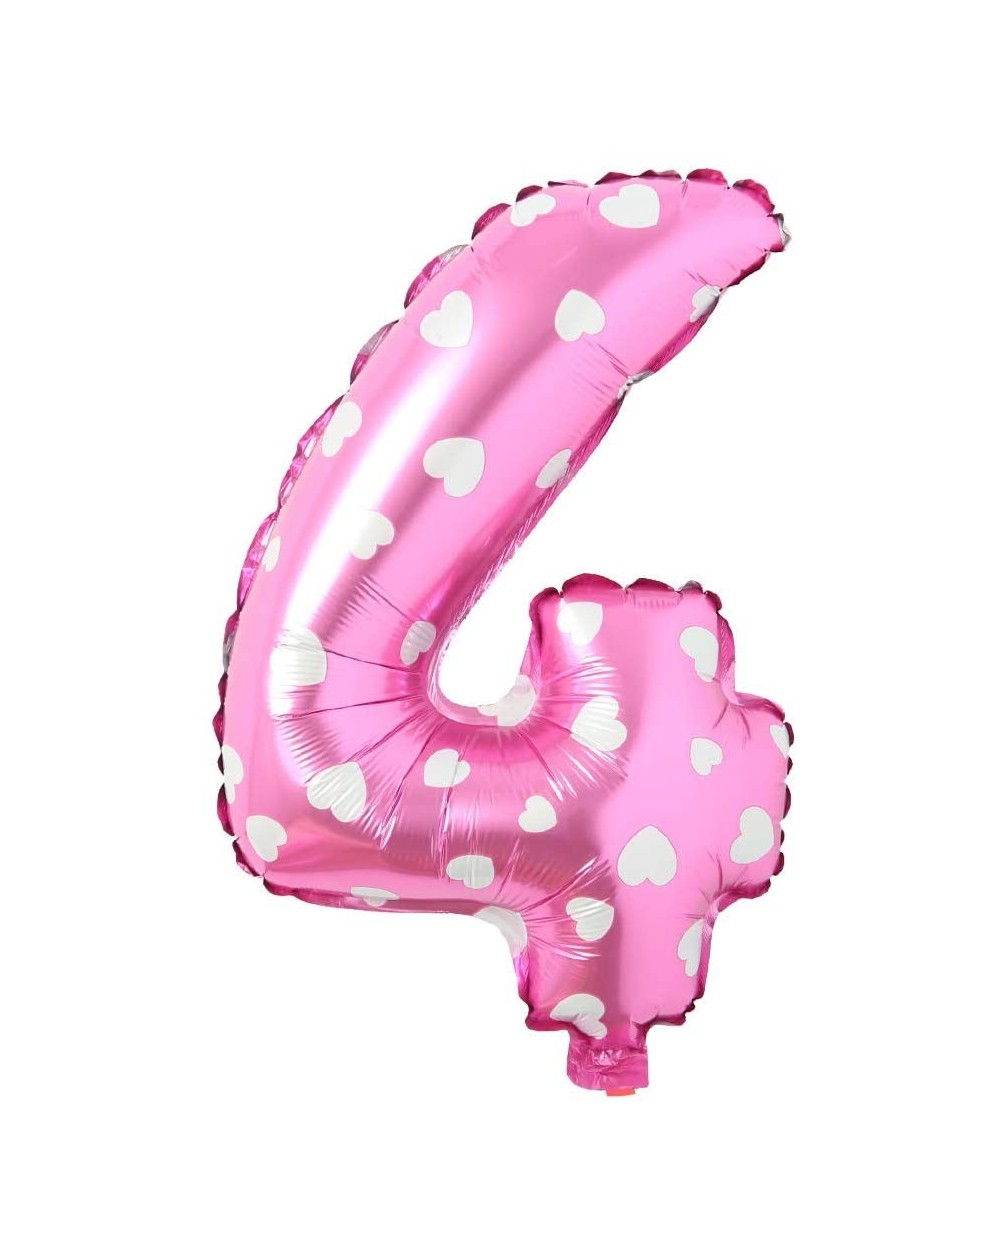 Balloons 16" inch Single Pink with Heart Alphabet Letter Number Balloons Aluminum Hanging Foil Film Balloon Wedding Birthday ...